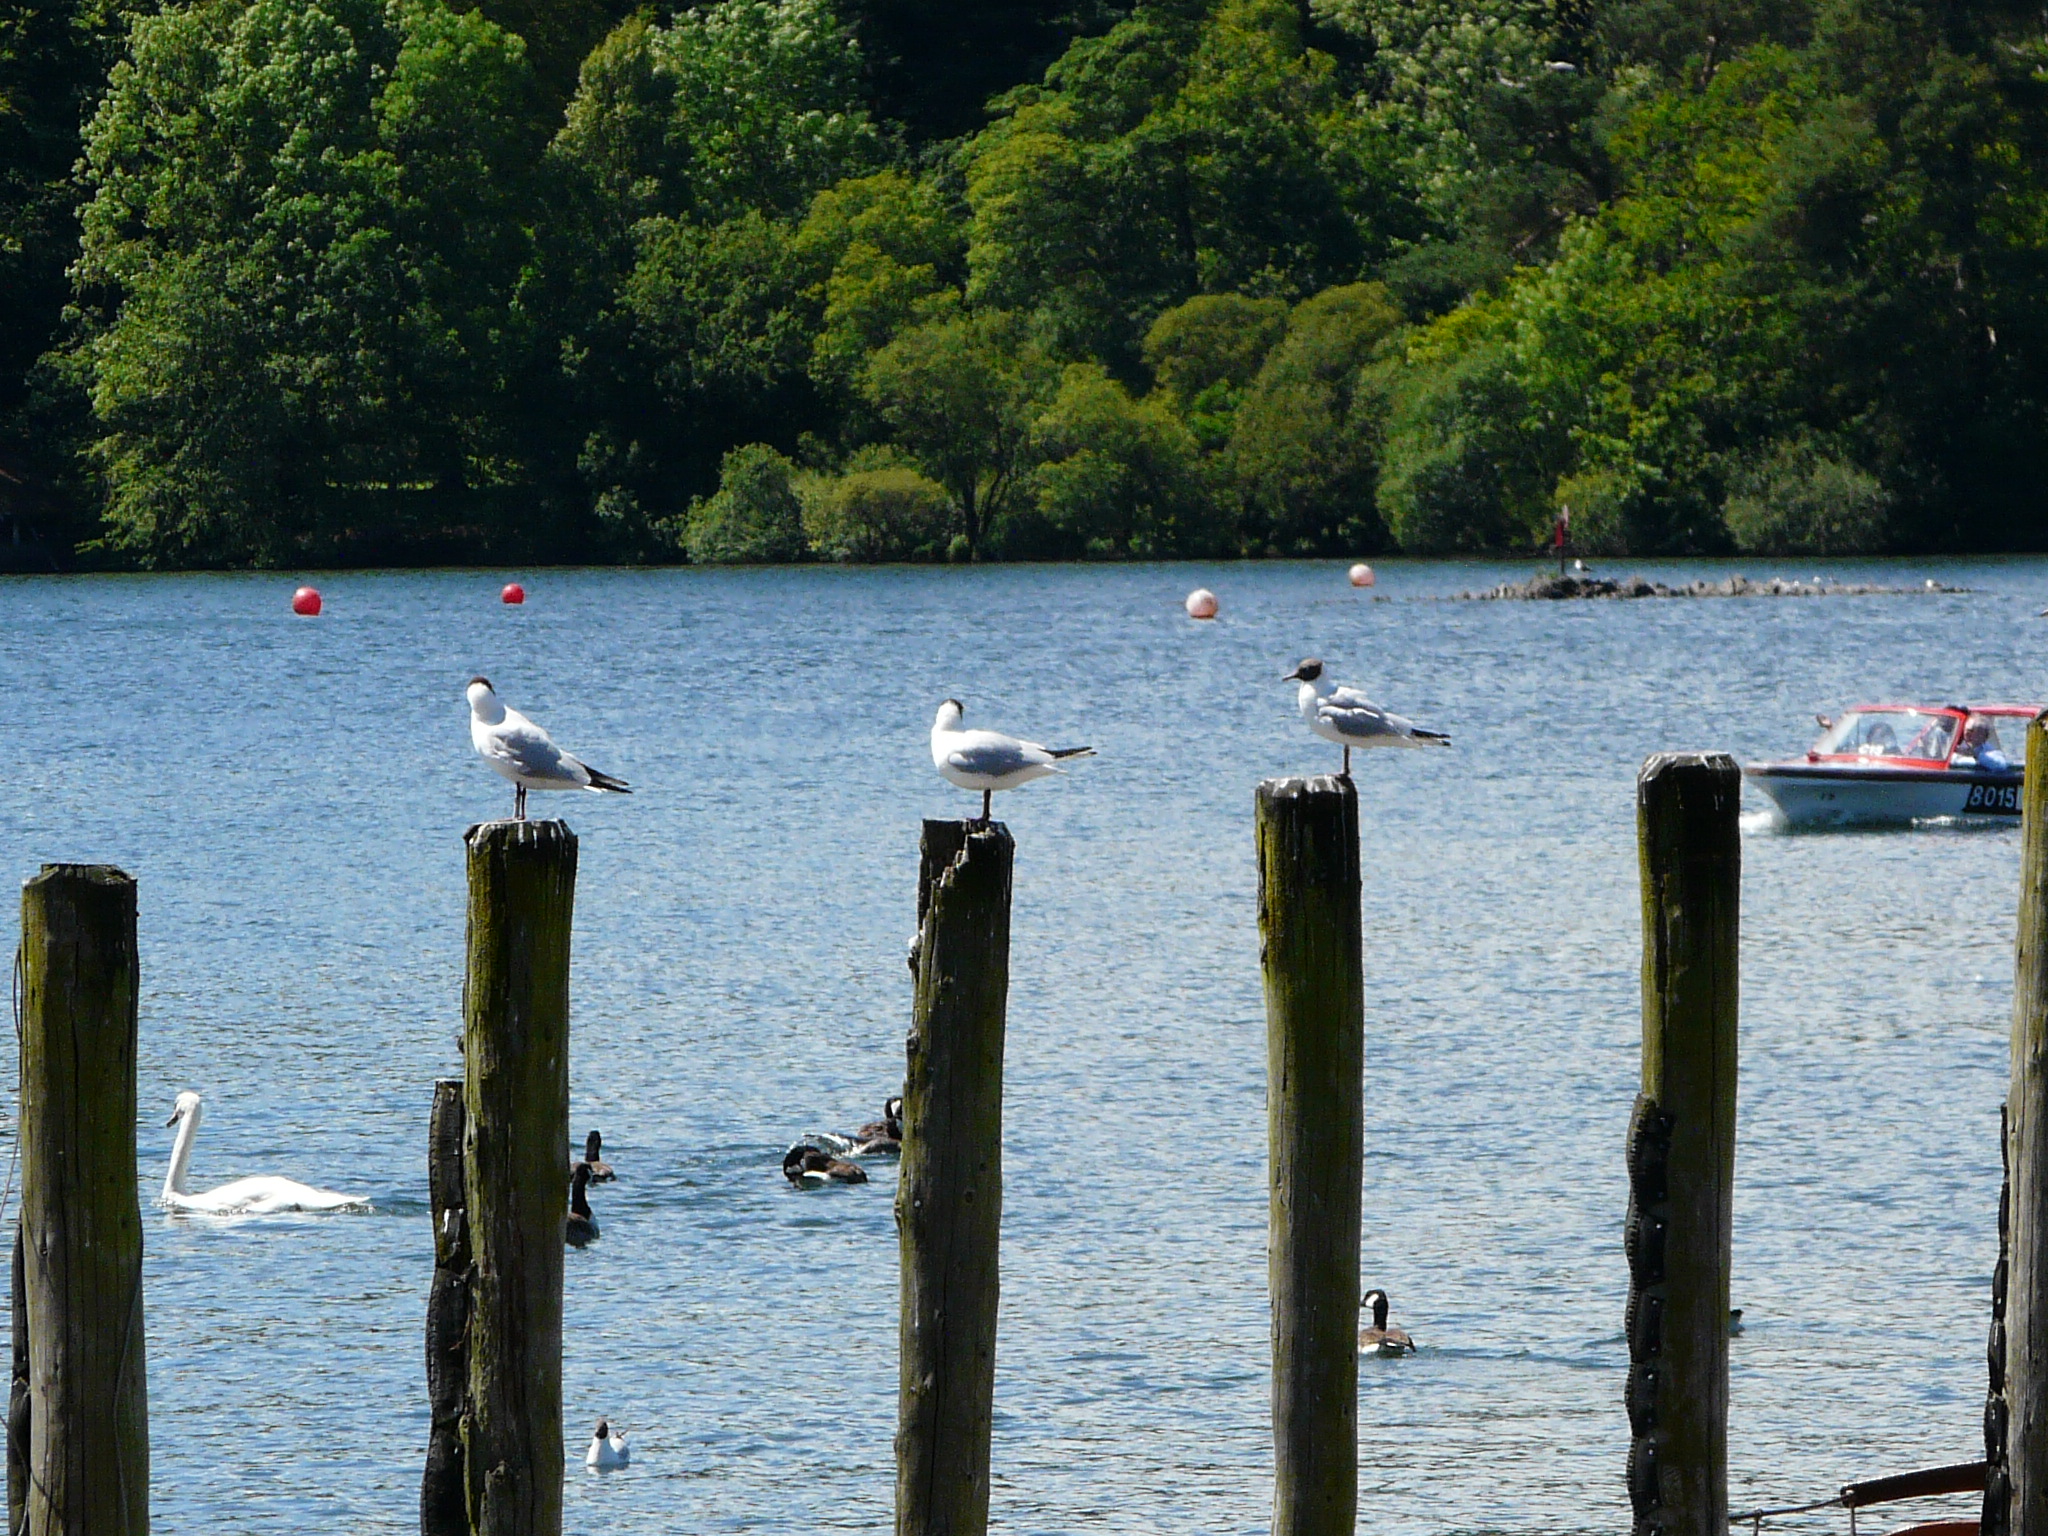 the seagulls are sitting on old posts in the water